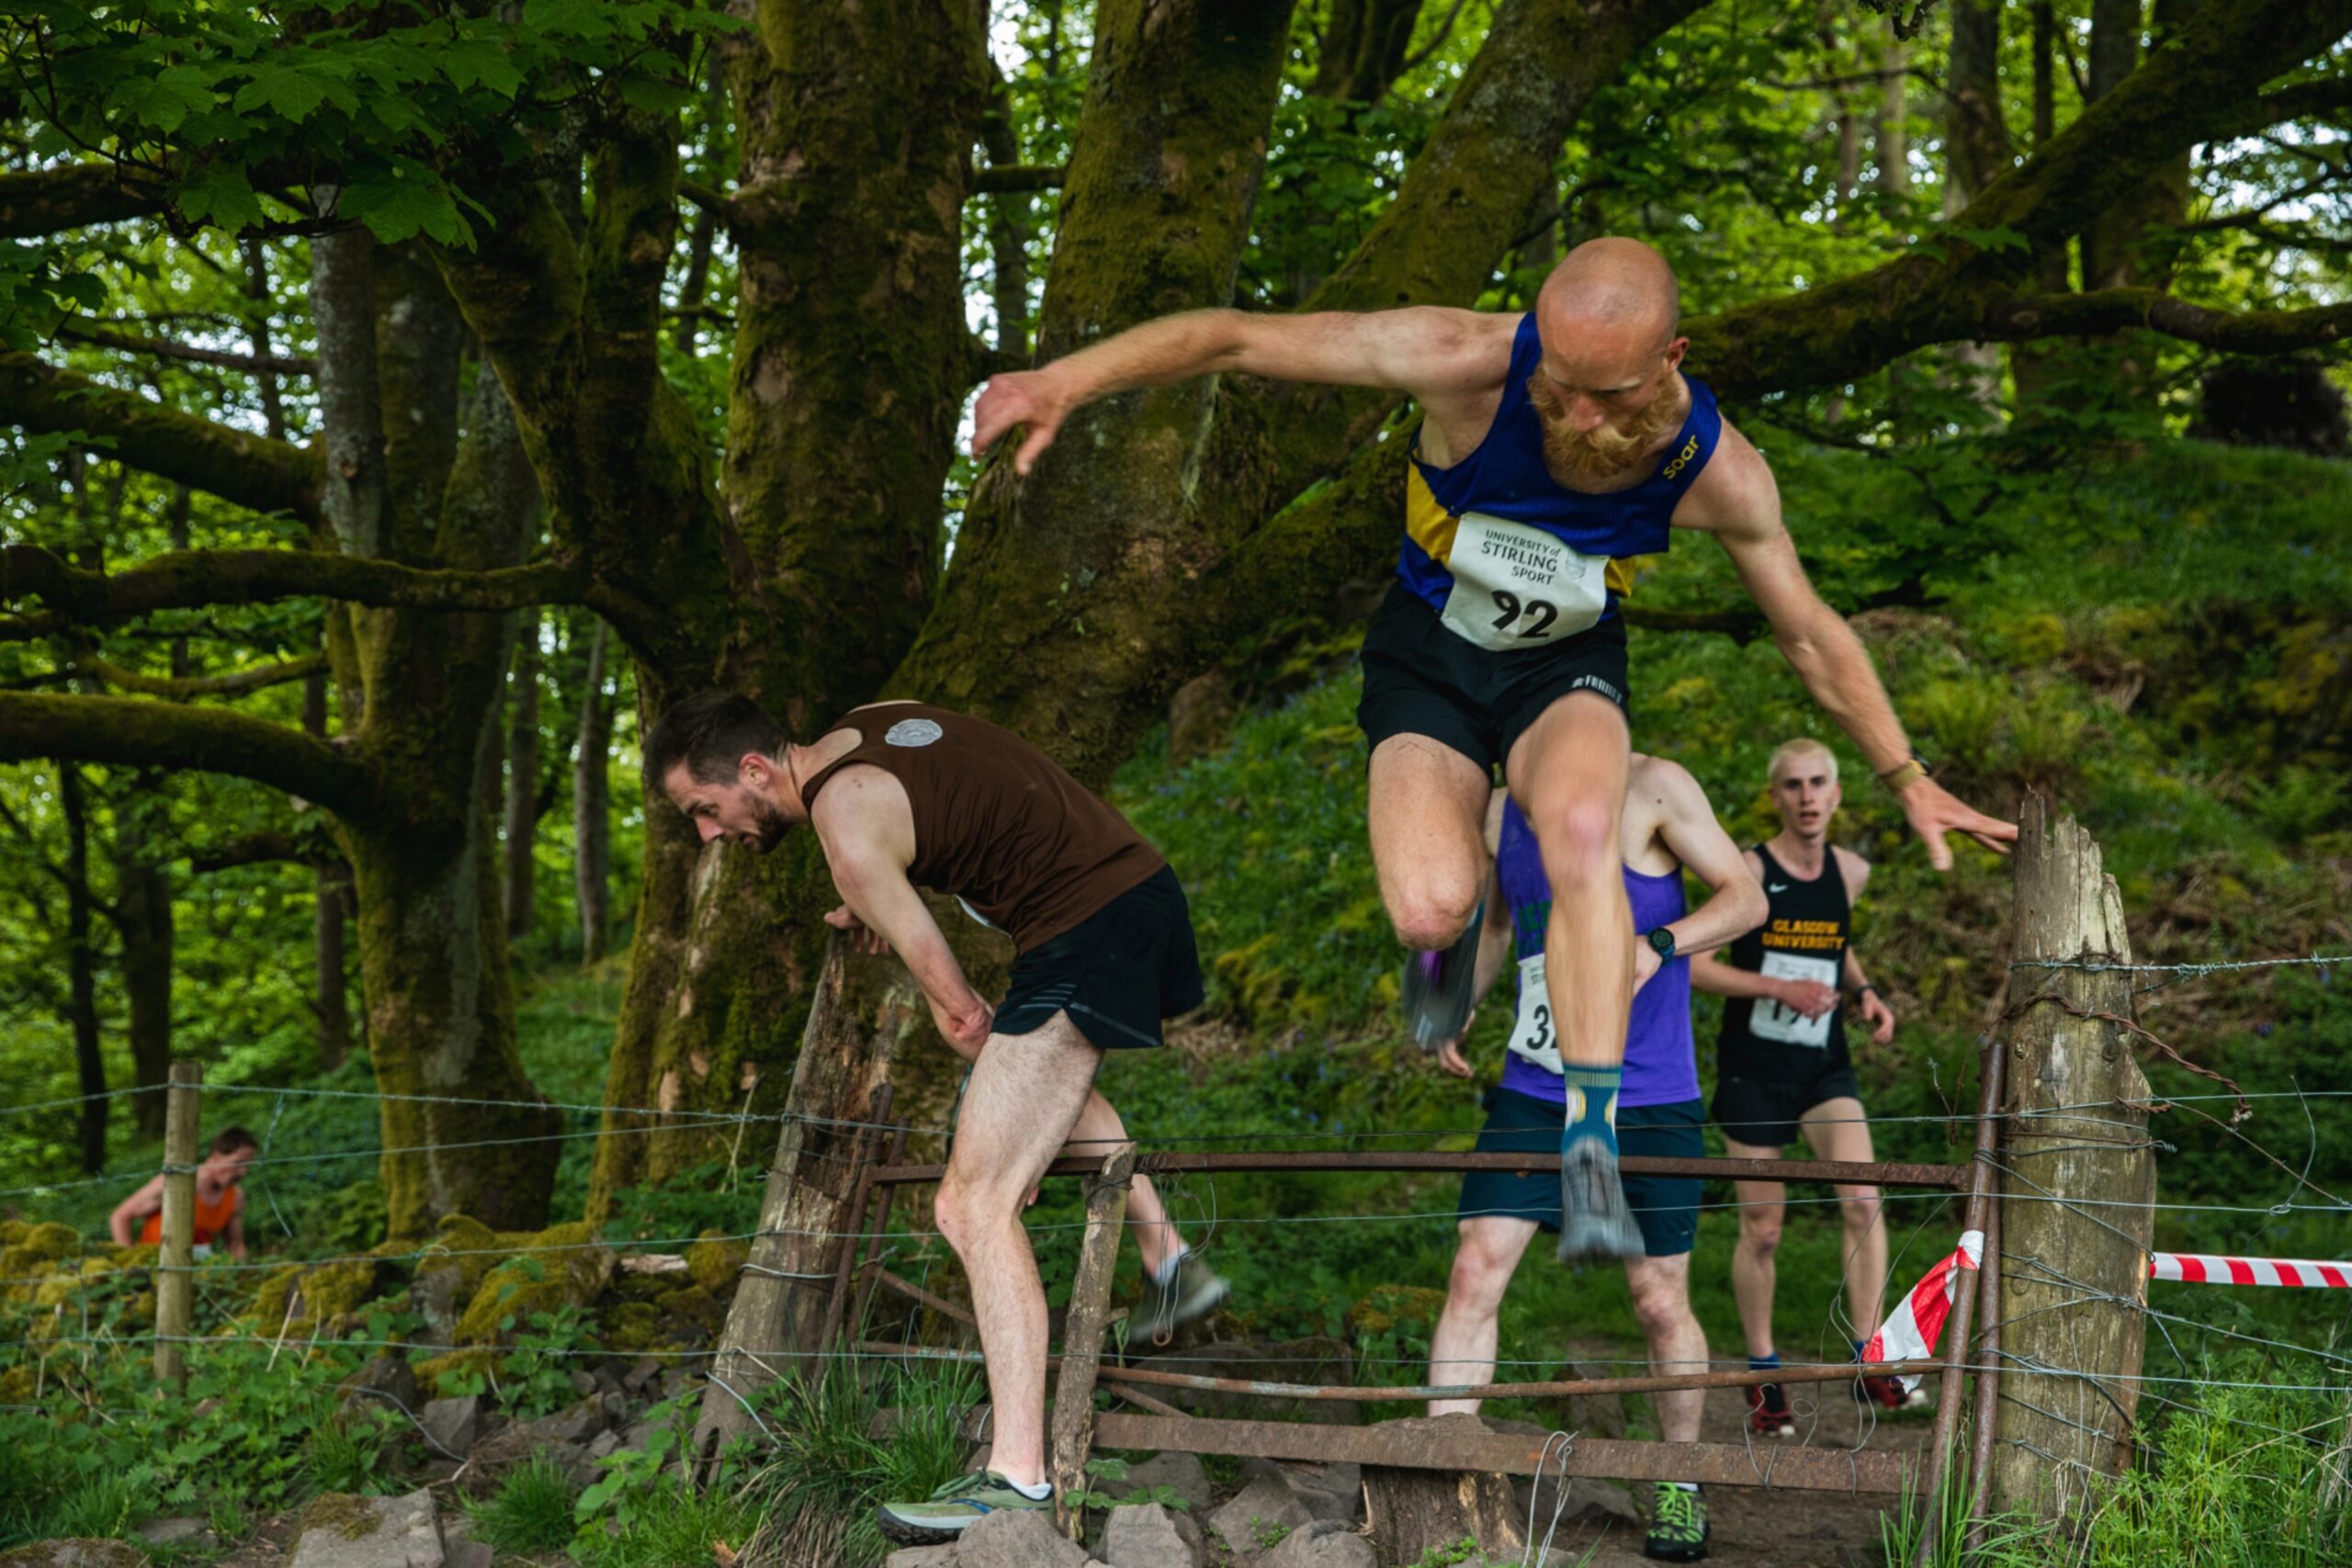 Runners jump over a style as they come out of the woods